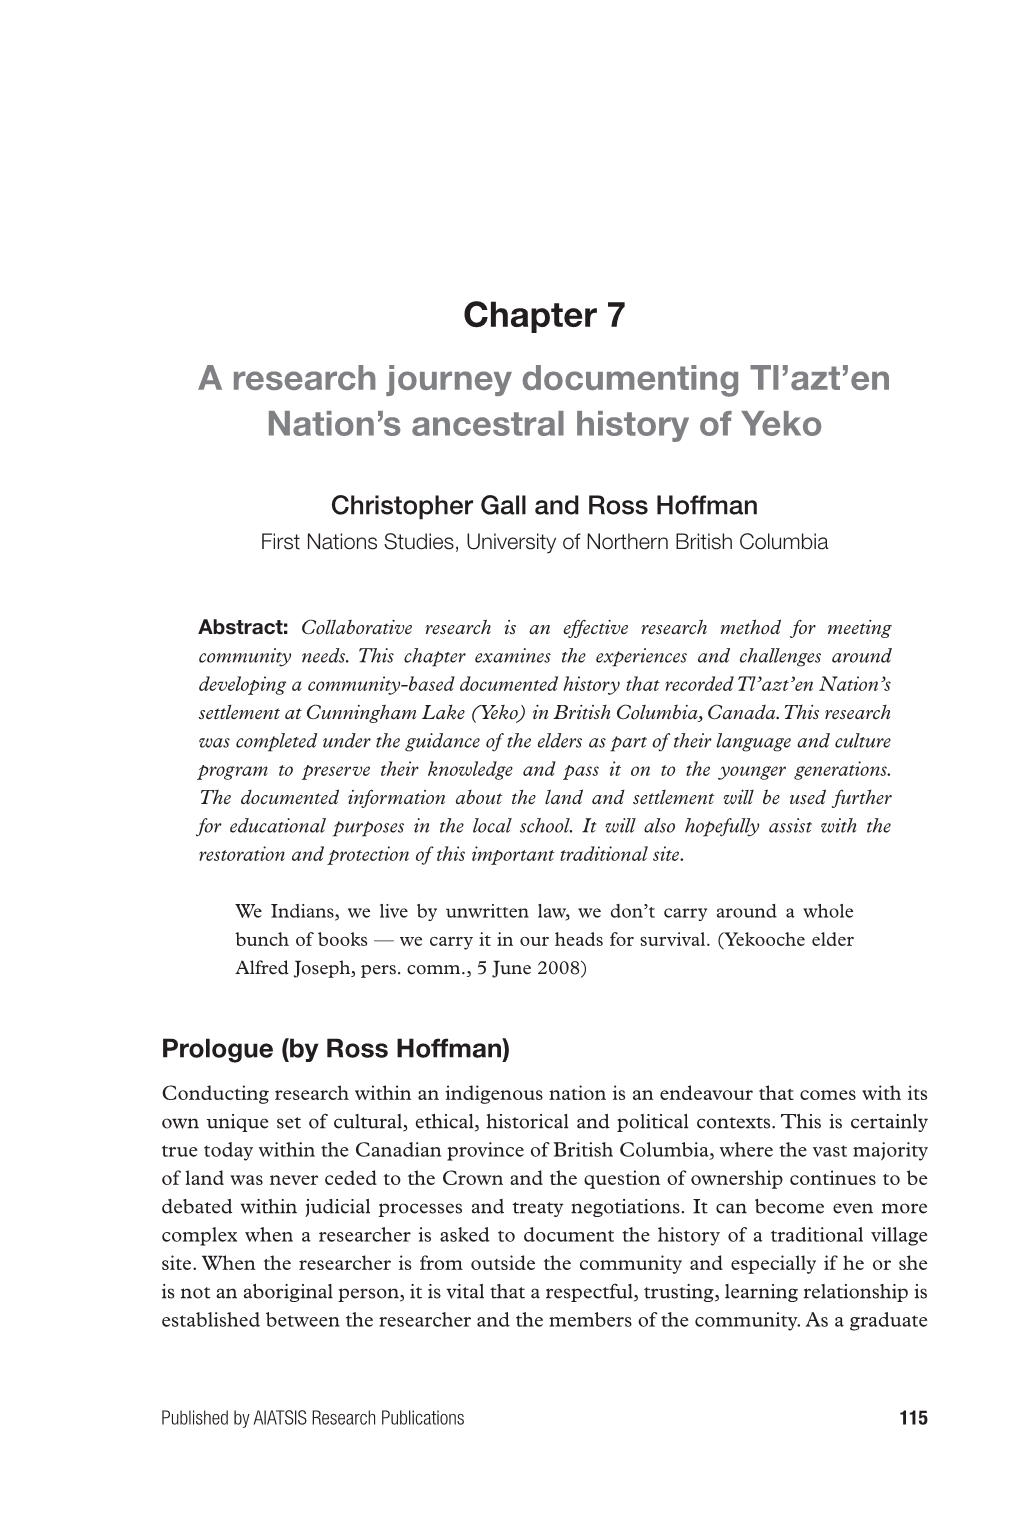 Chapter 7 a Research Journey Documenting Tl'azt'en Nation's